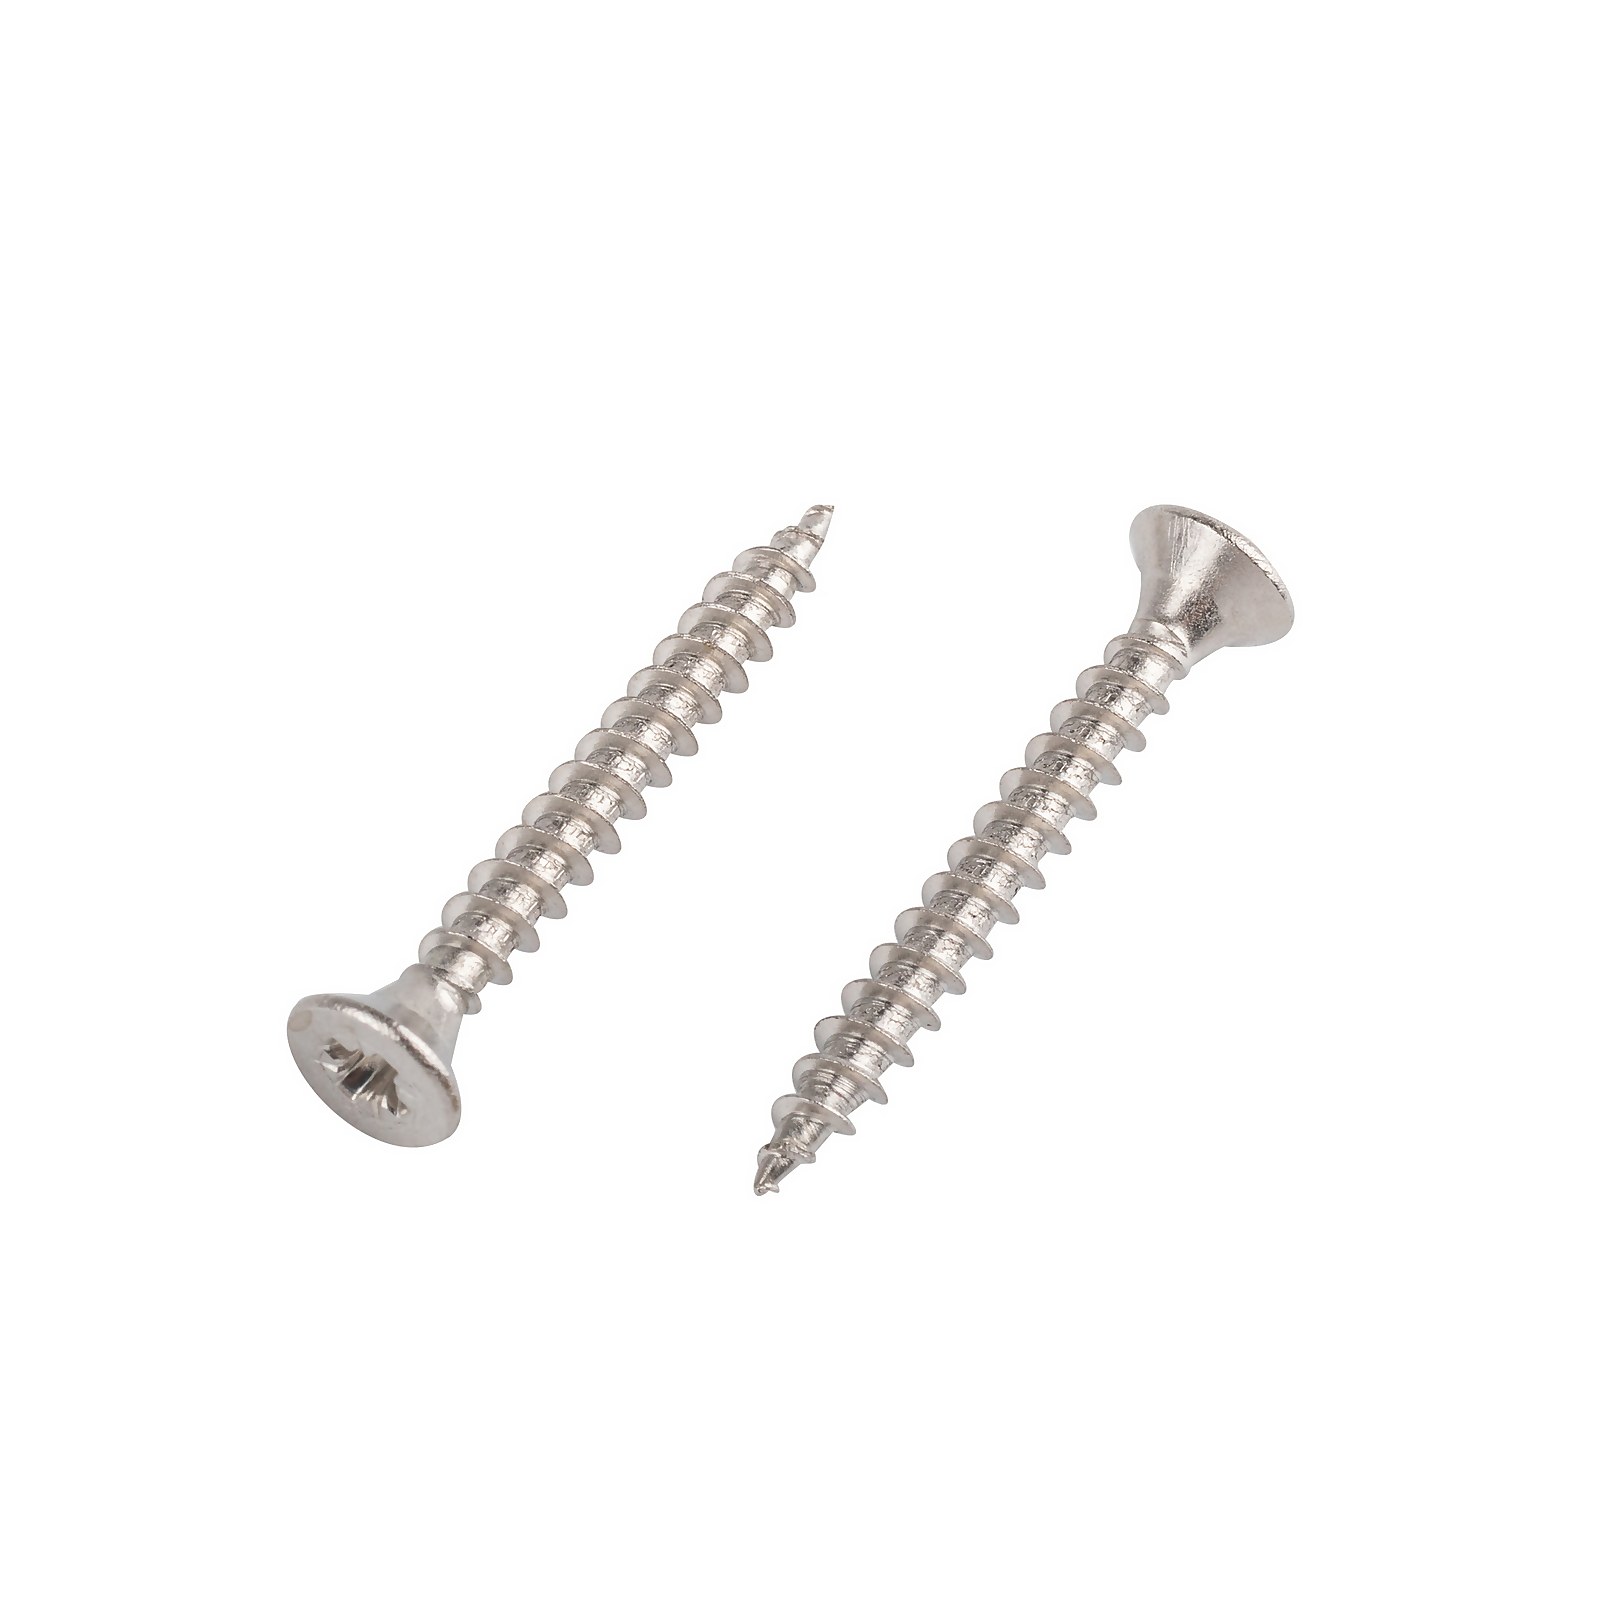 Photo of Homebase Stainless Steel Single Thread Screw 3.5 X 25mm 25 Pack